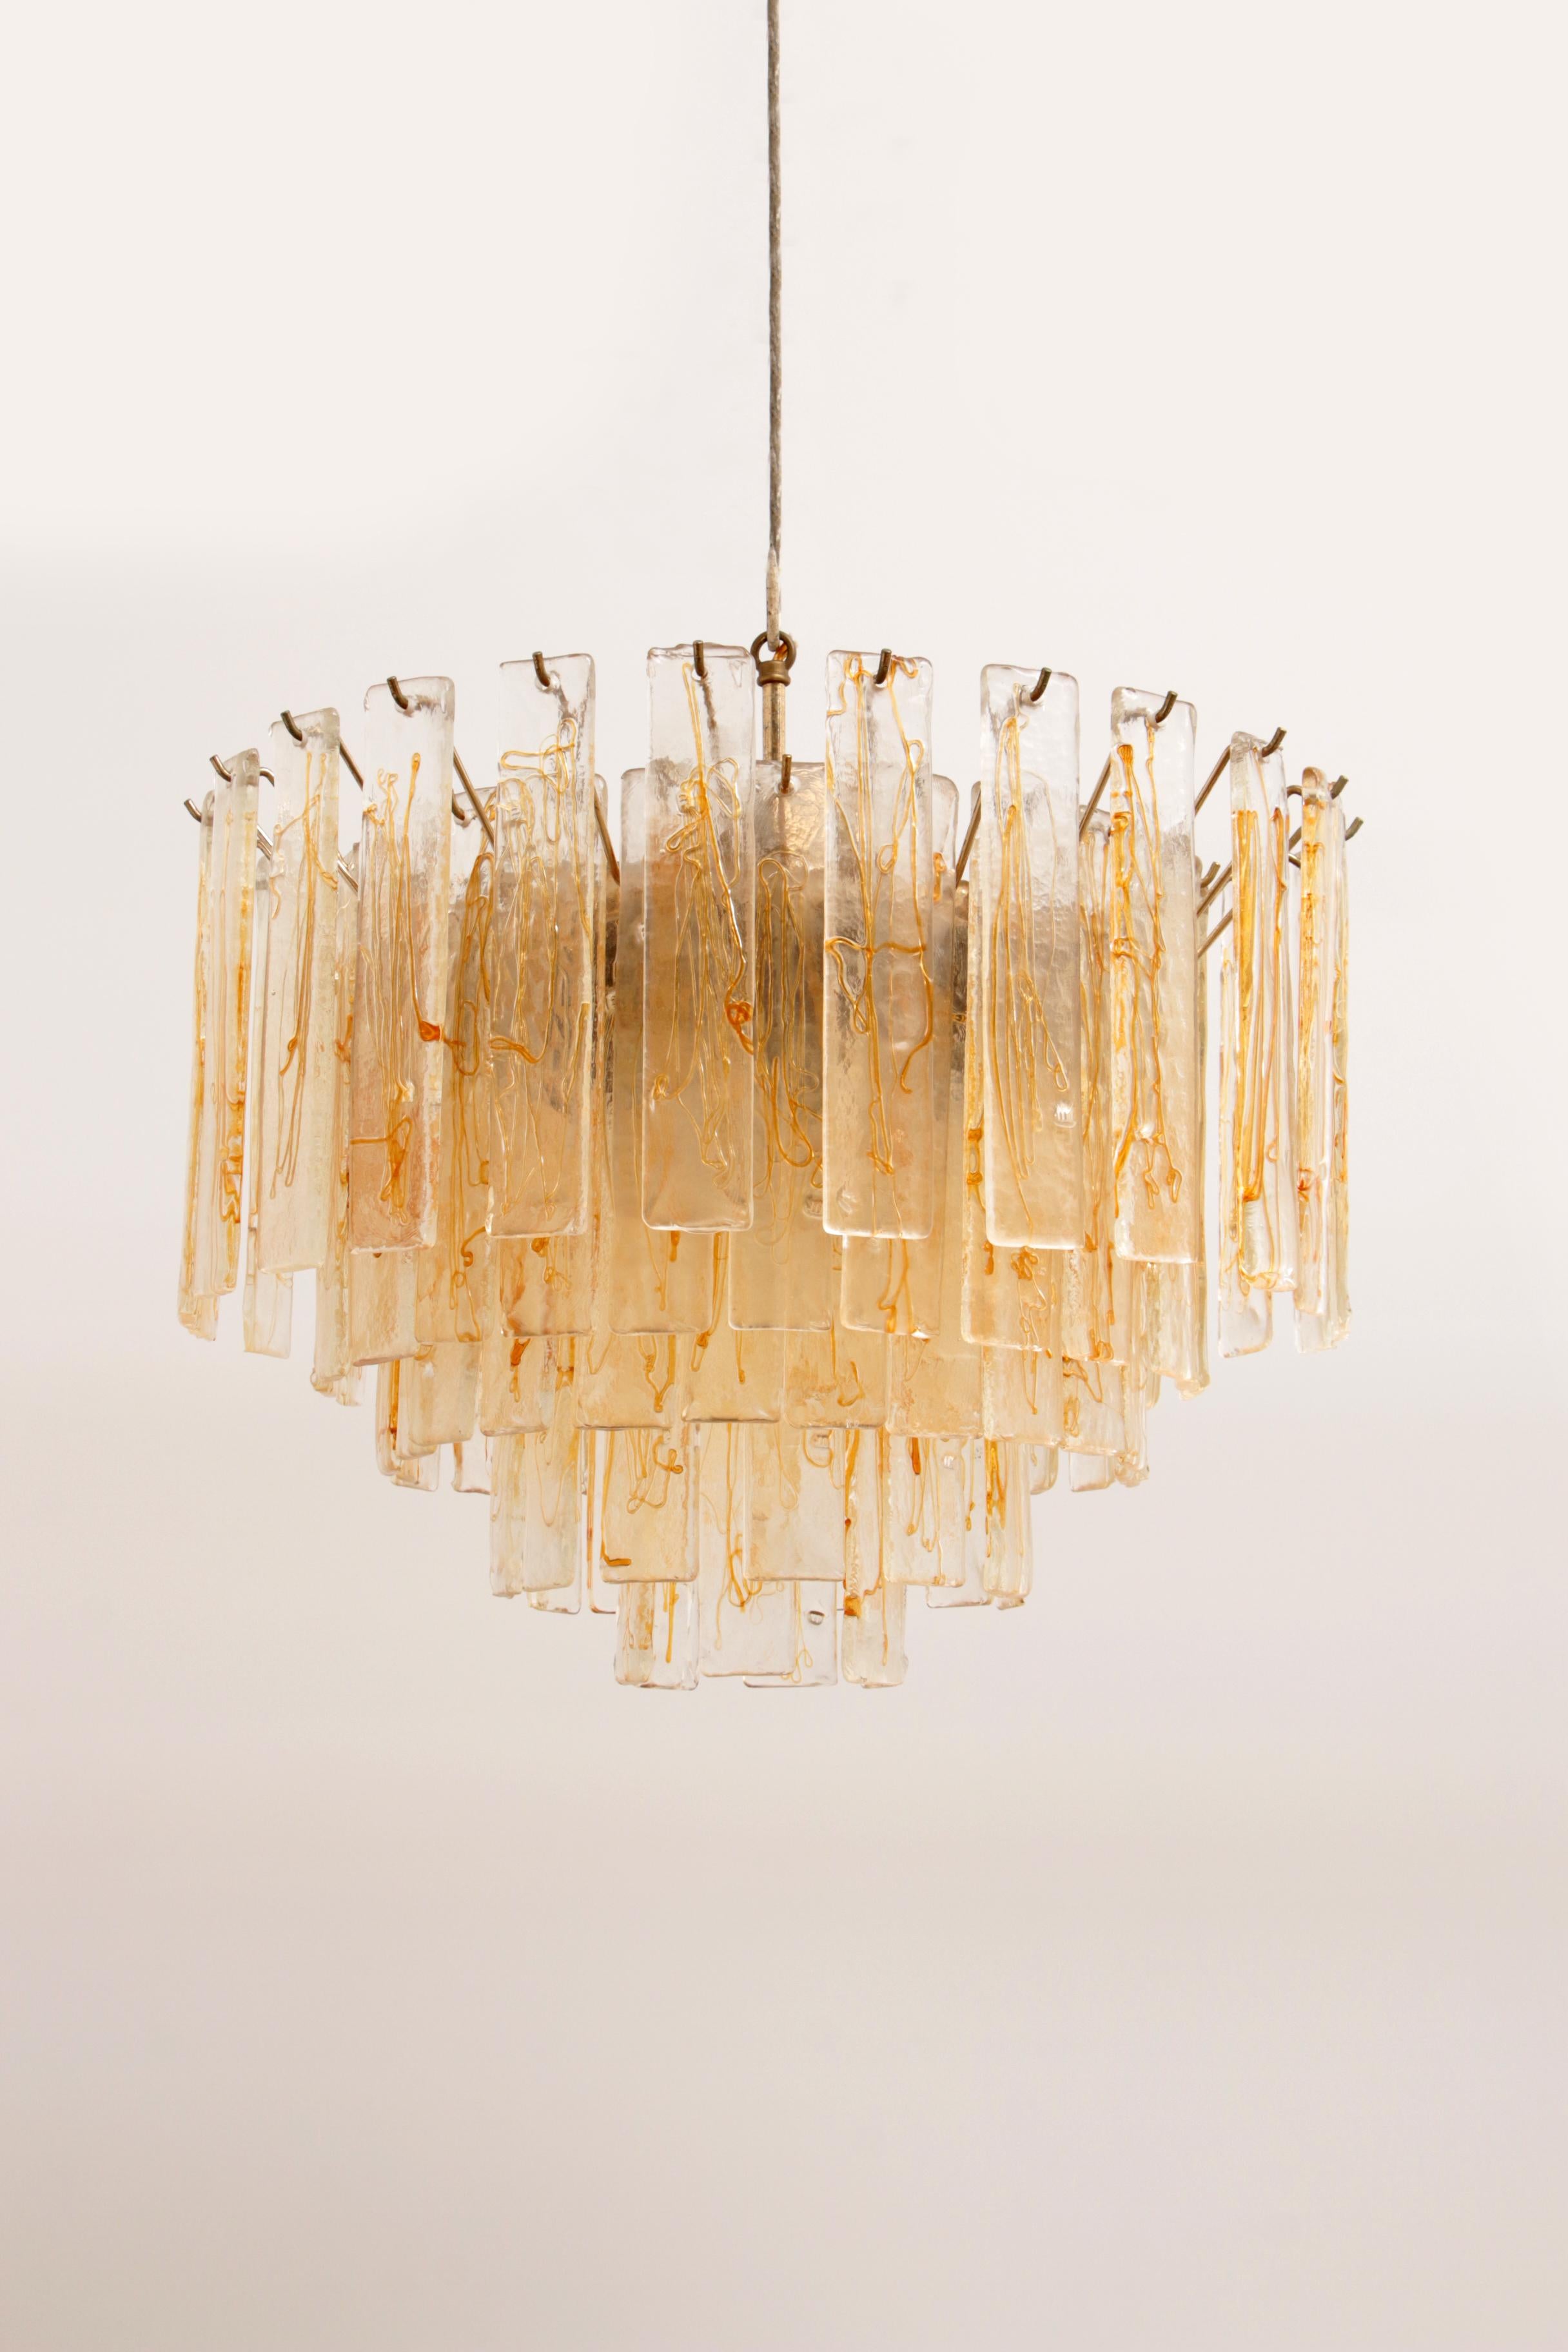 The absolutely fantastic vintage Murano glass large chandelier made in Italy in the 1970s. This lamp has 5 rings that overlap beautifully. The lamp consists of glass plates of Murano glass, you can view the glass from 2 sides, there is a beautiful